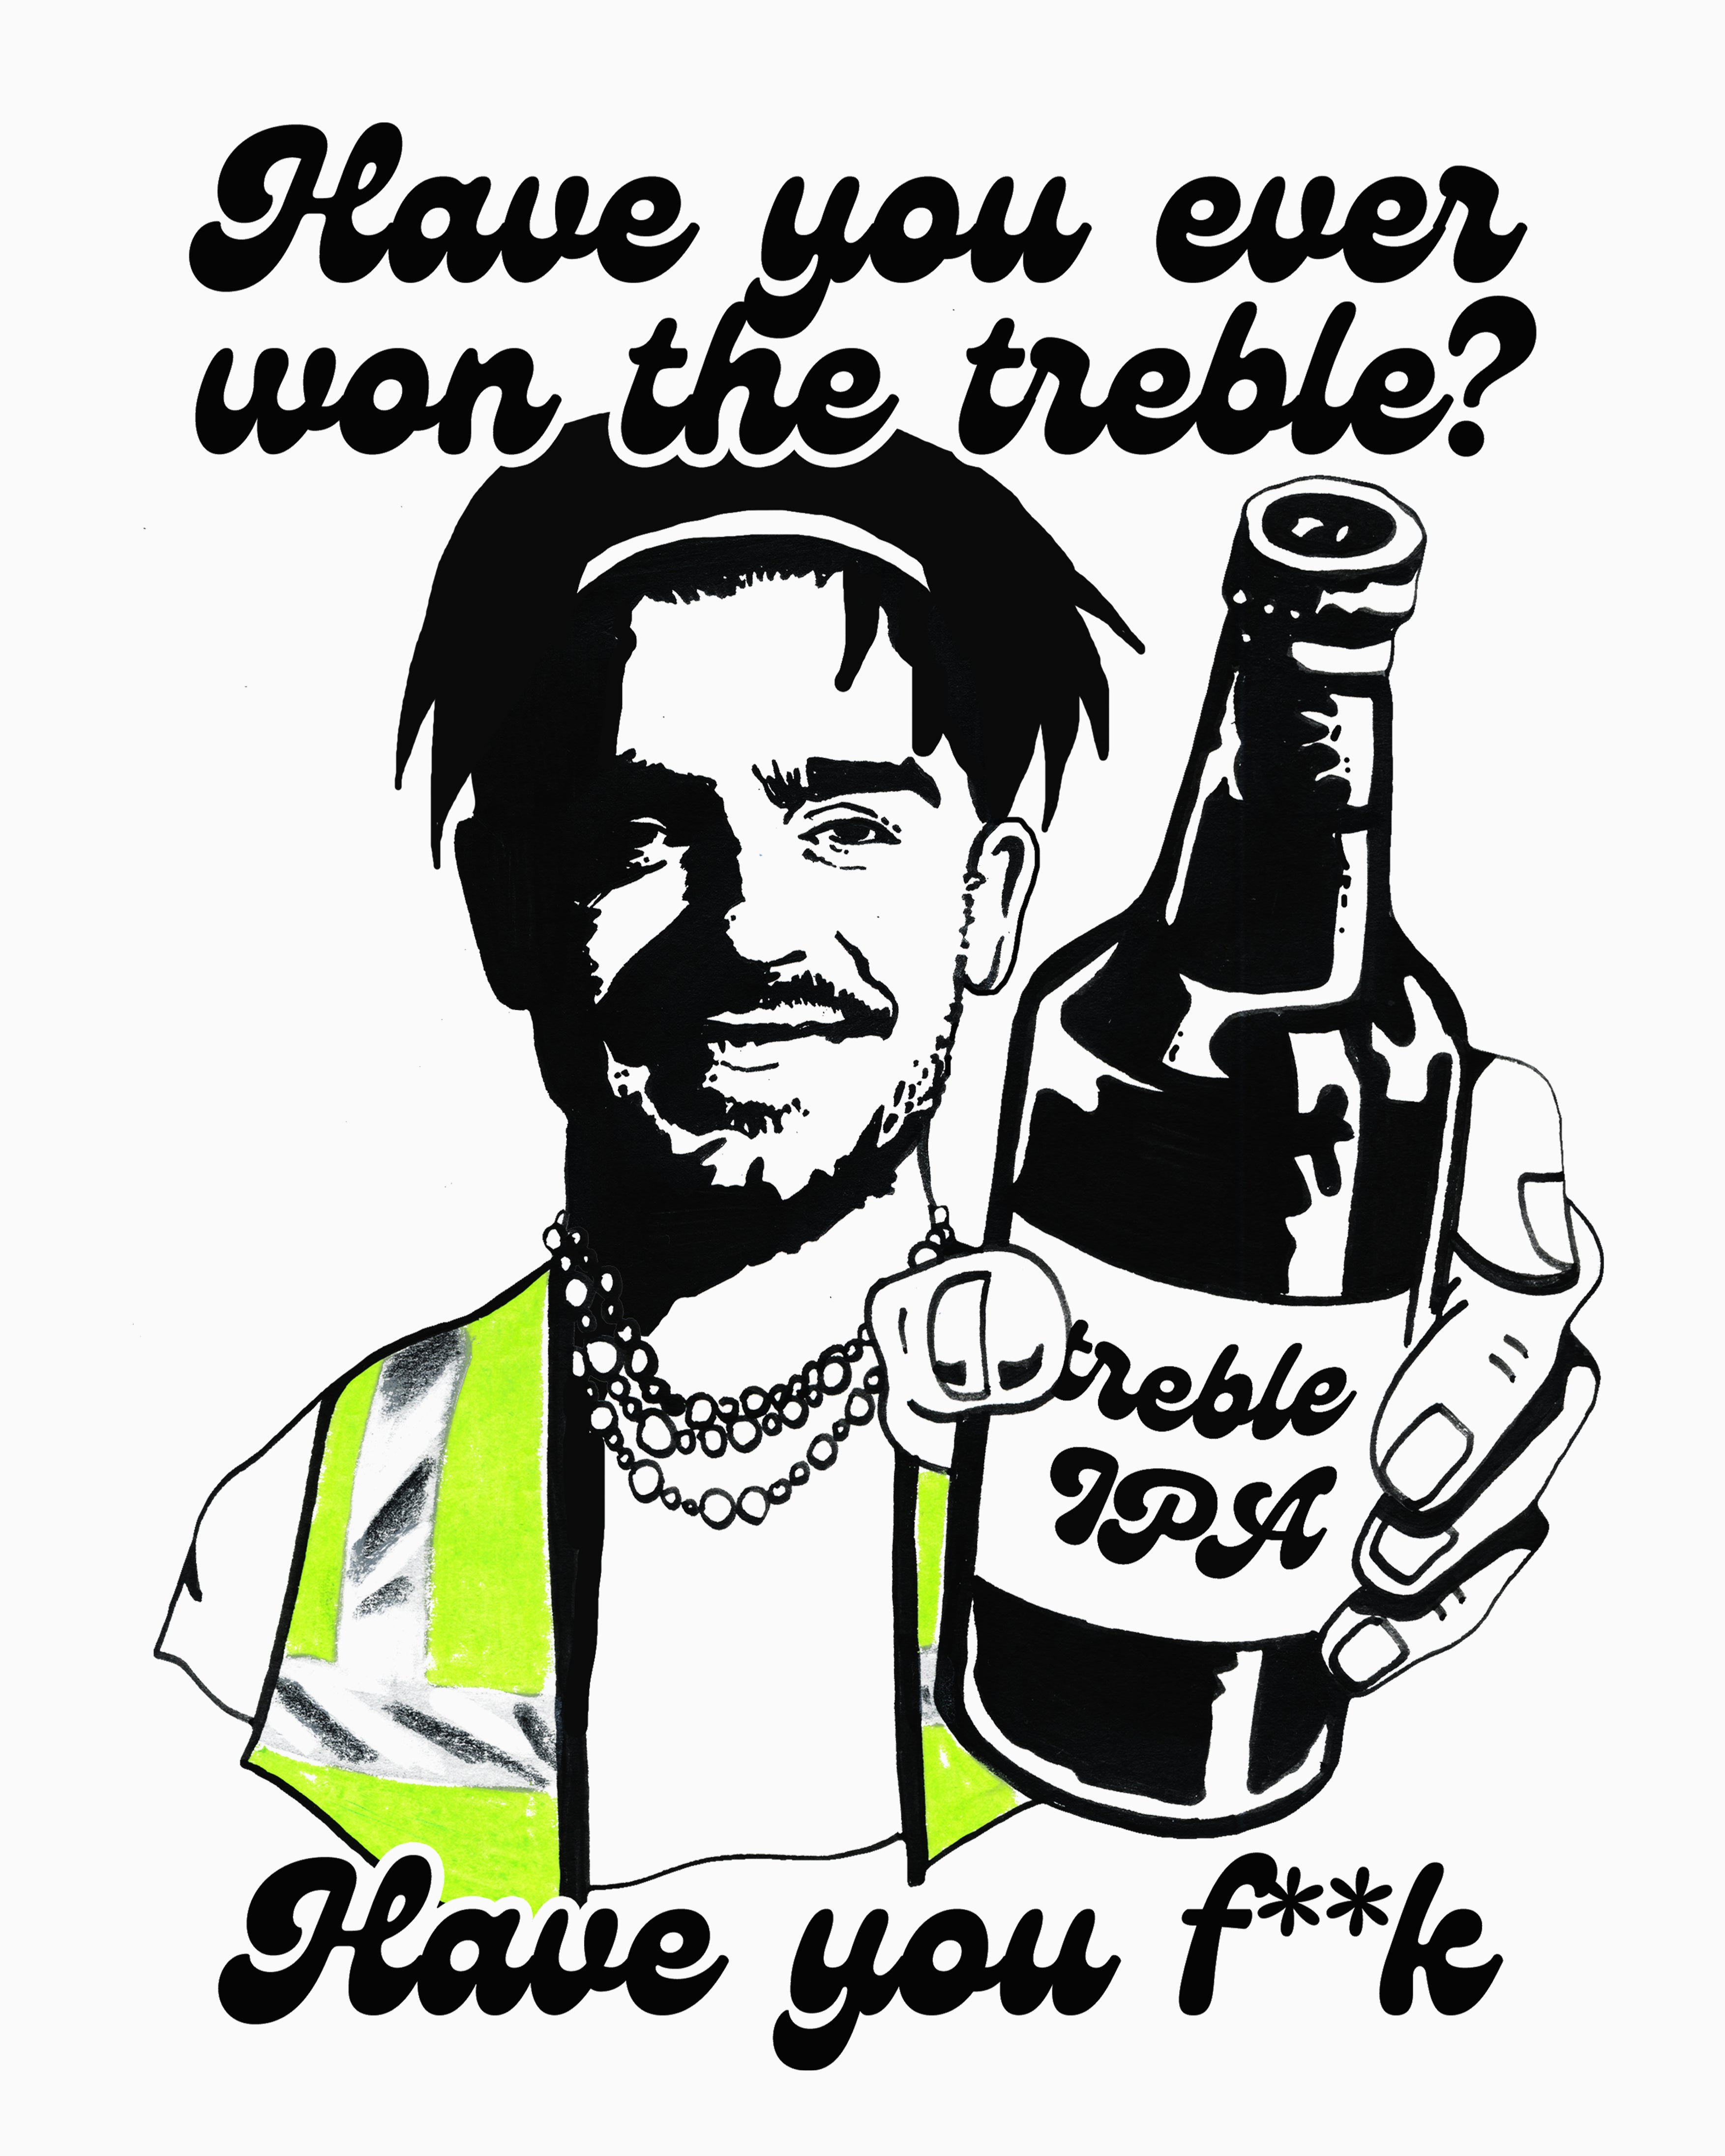 Have You Ever Won the Treble? - Tee or Sweat